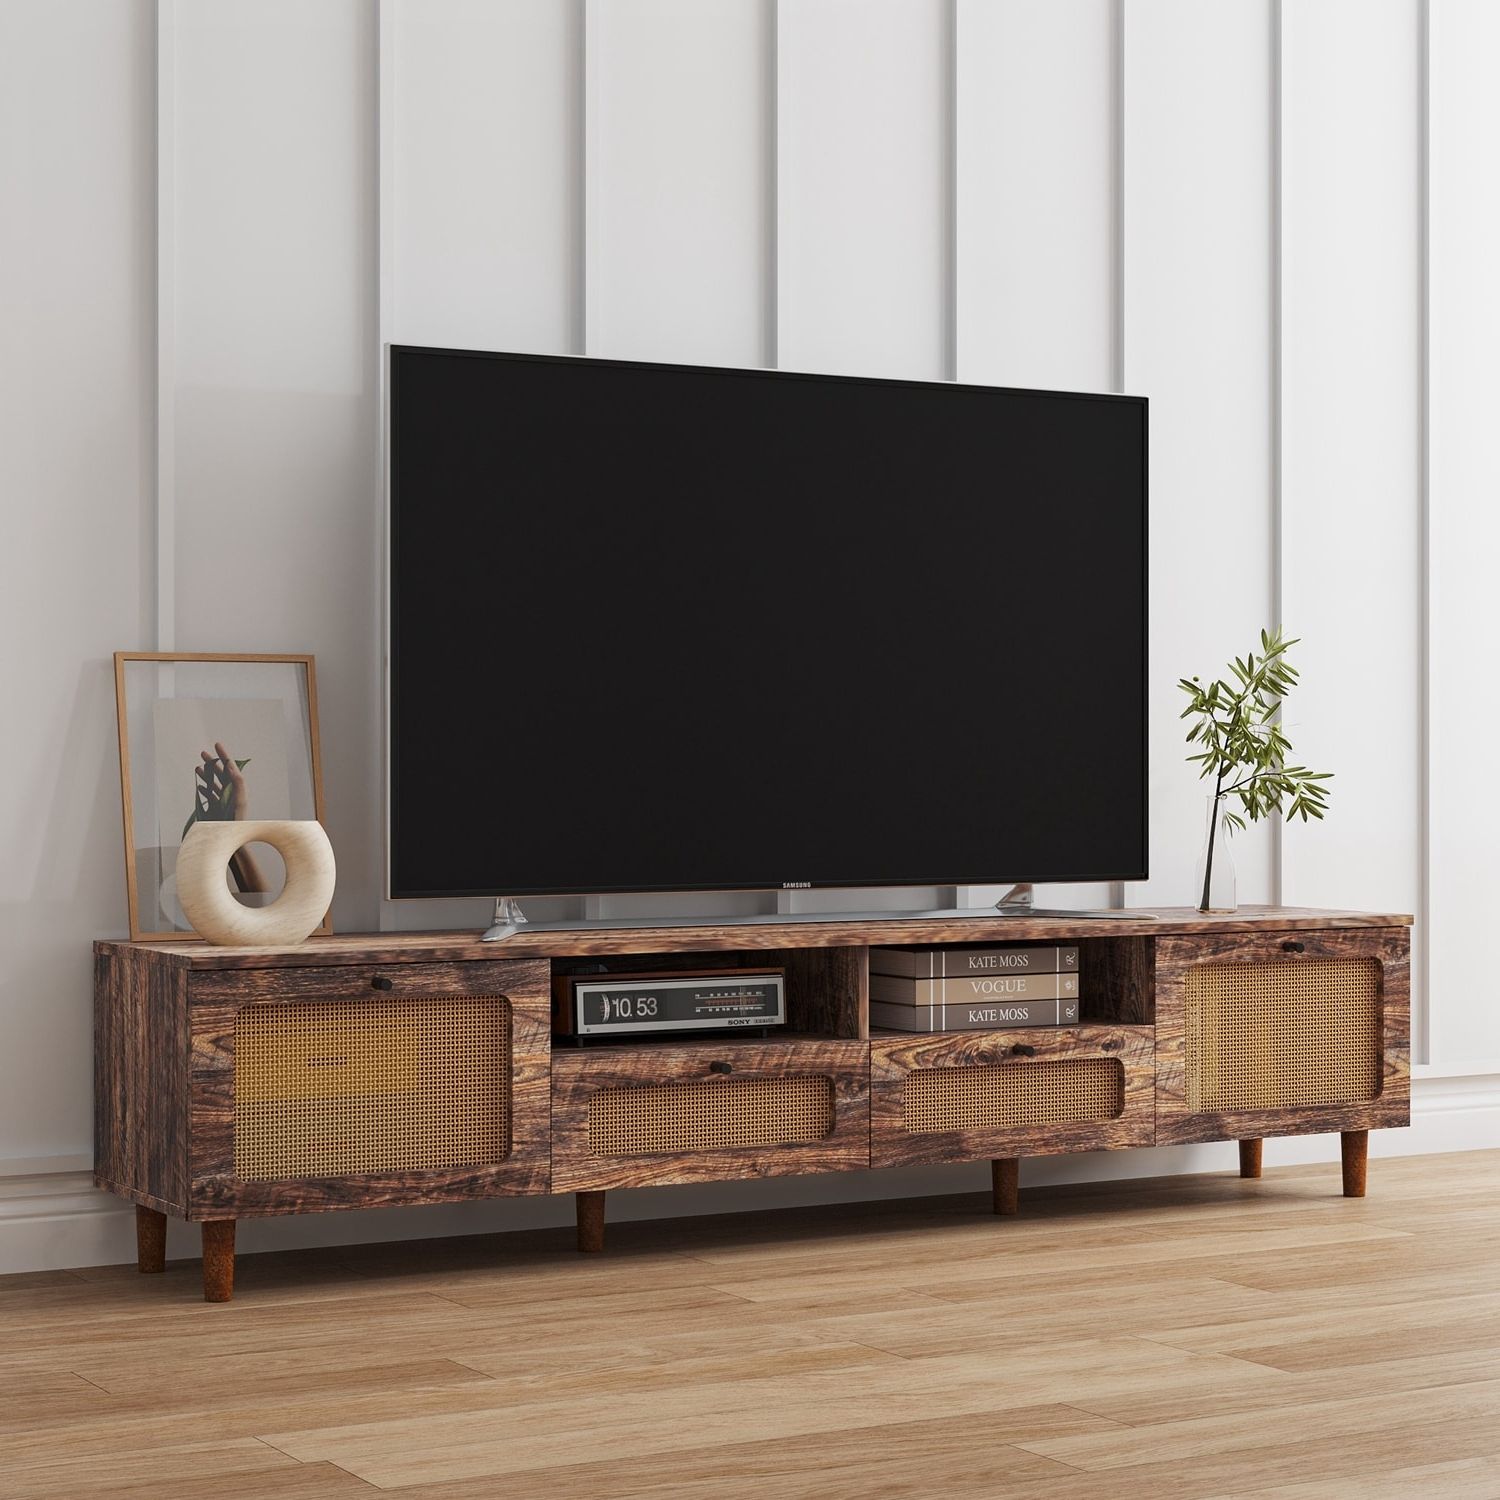 Farmhouse Rattan Tv Stand – Bed Bath & Beyond – 37216794 With Regard To Farmhouse Rattan Tv Stands (View 15 of 20)